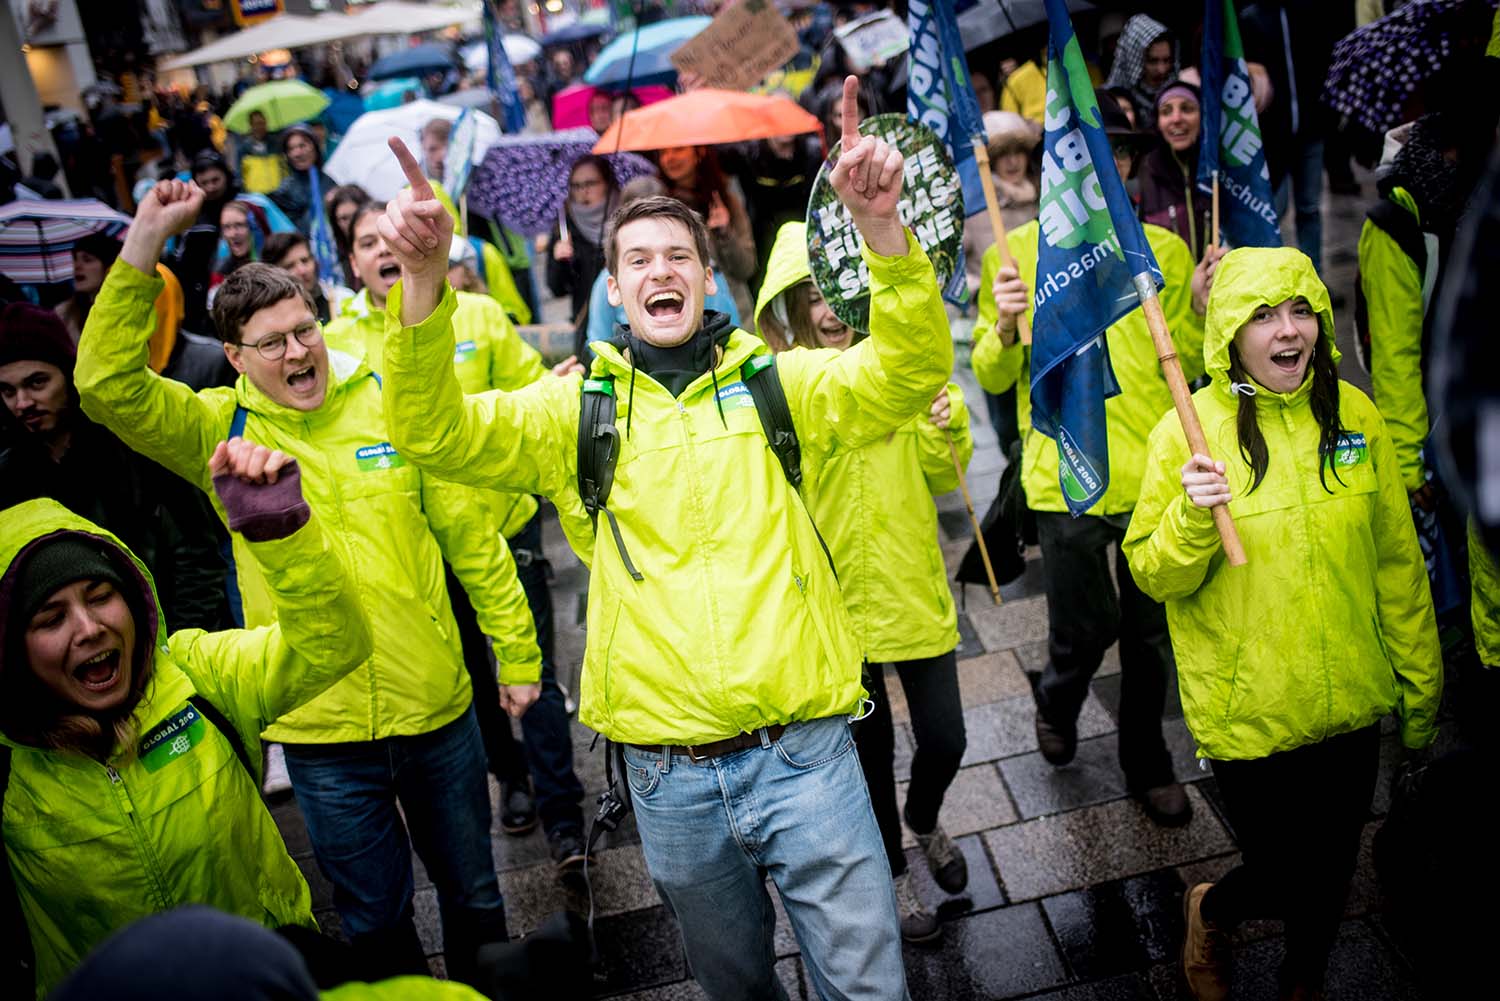 Activists of GLOBAL 2000 at a climate demonstration